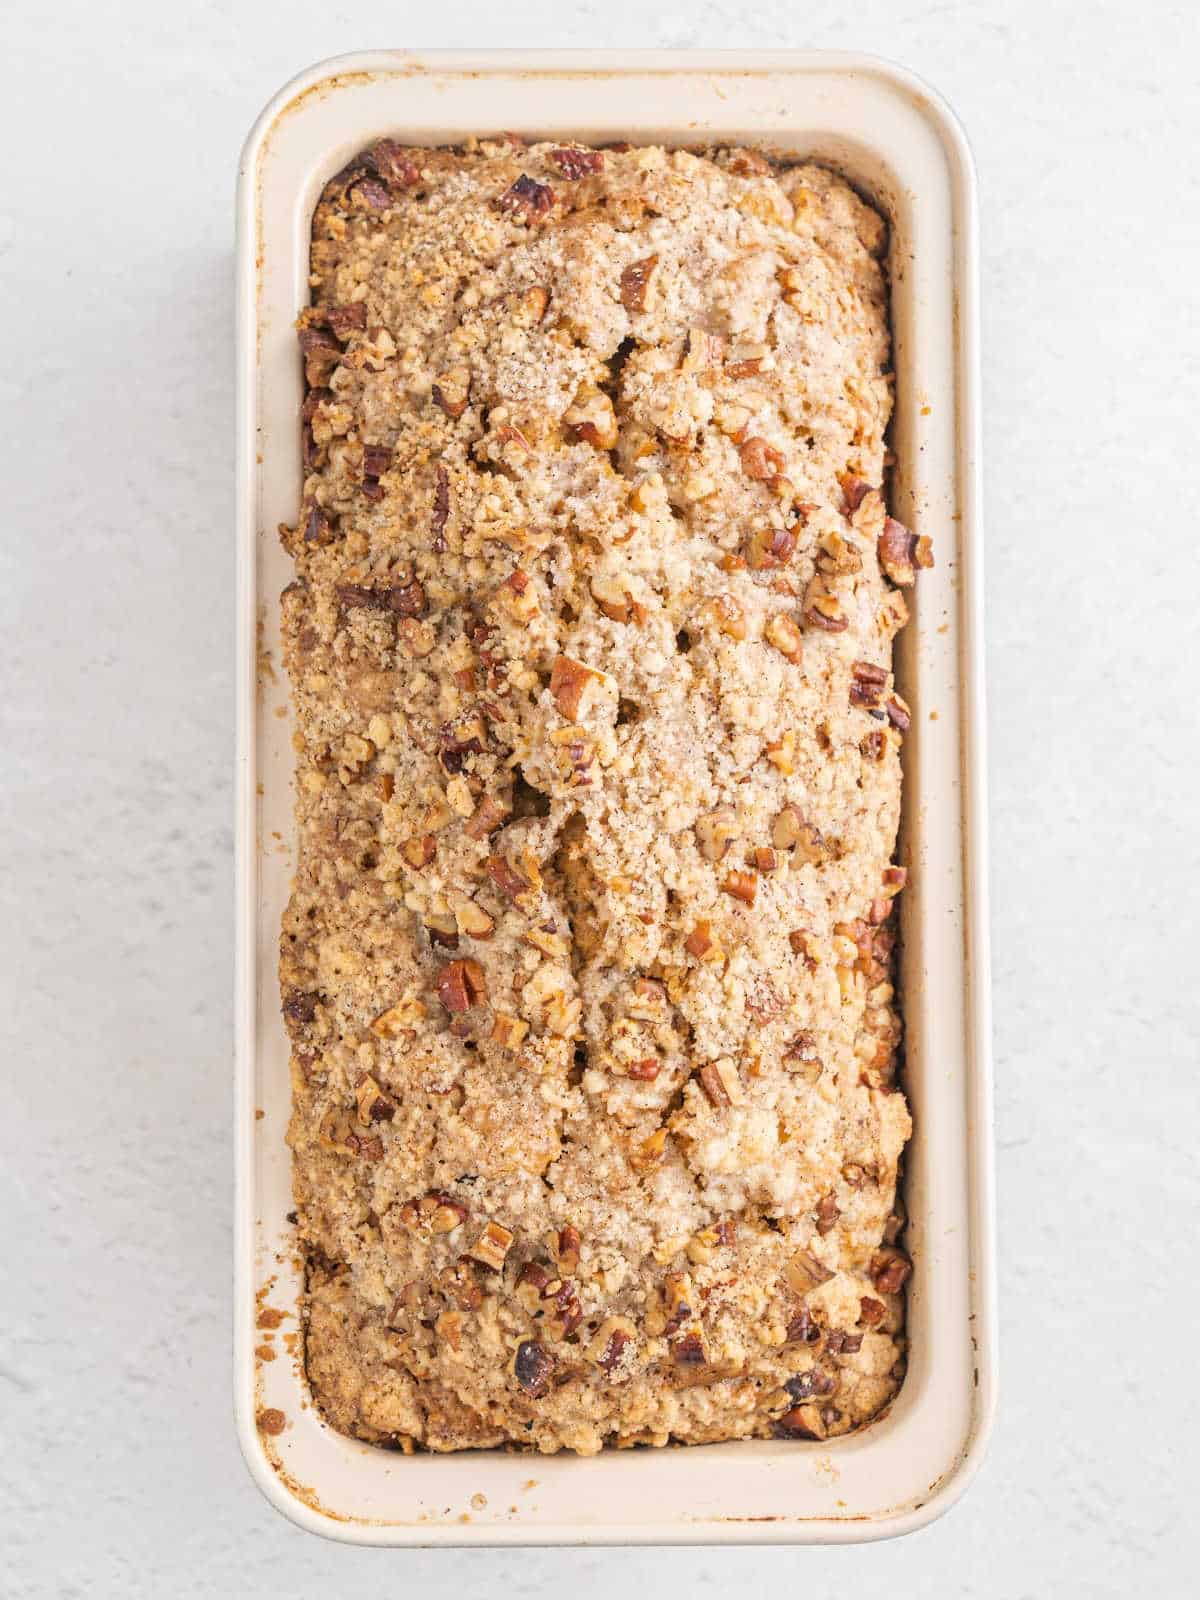 Baked apple streusel bread on a light colored loaf pan on a white surface. View from above.